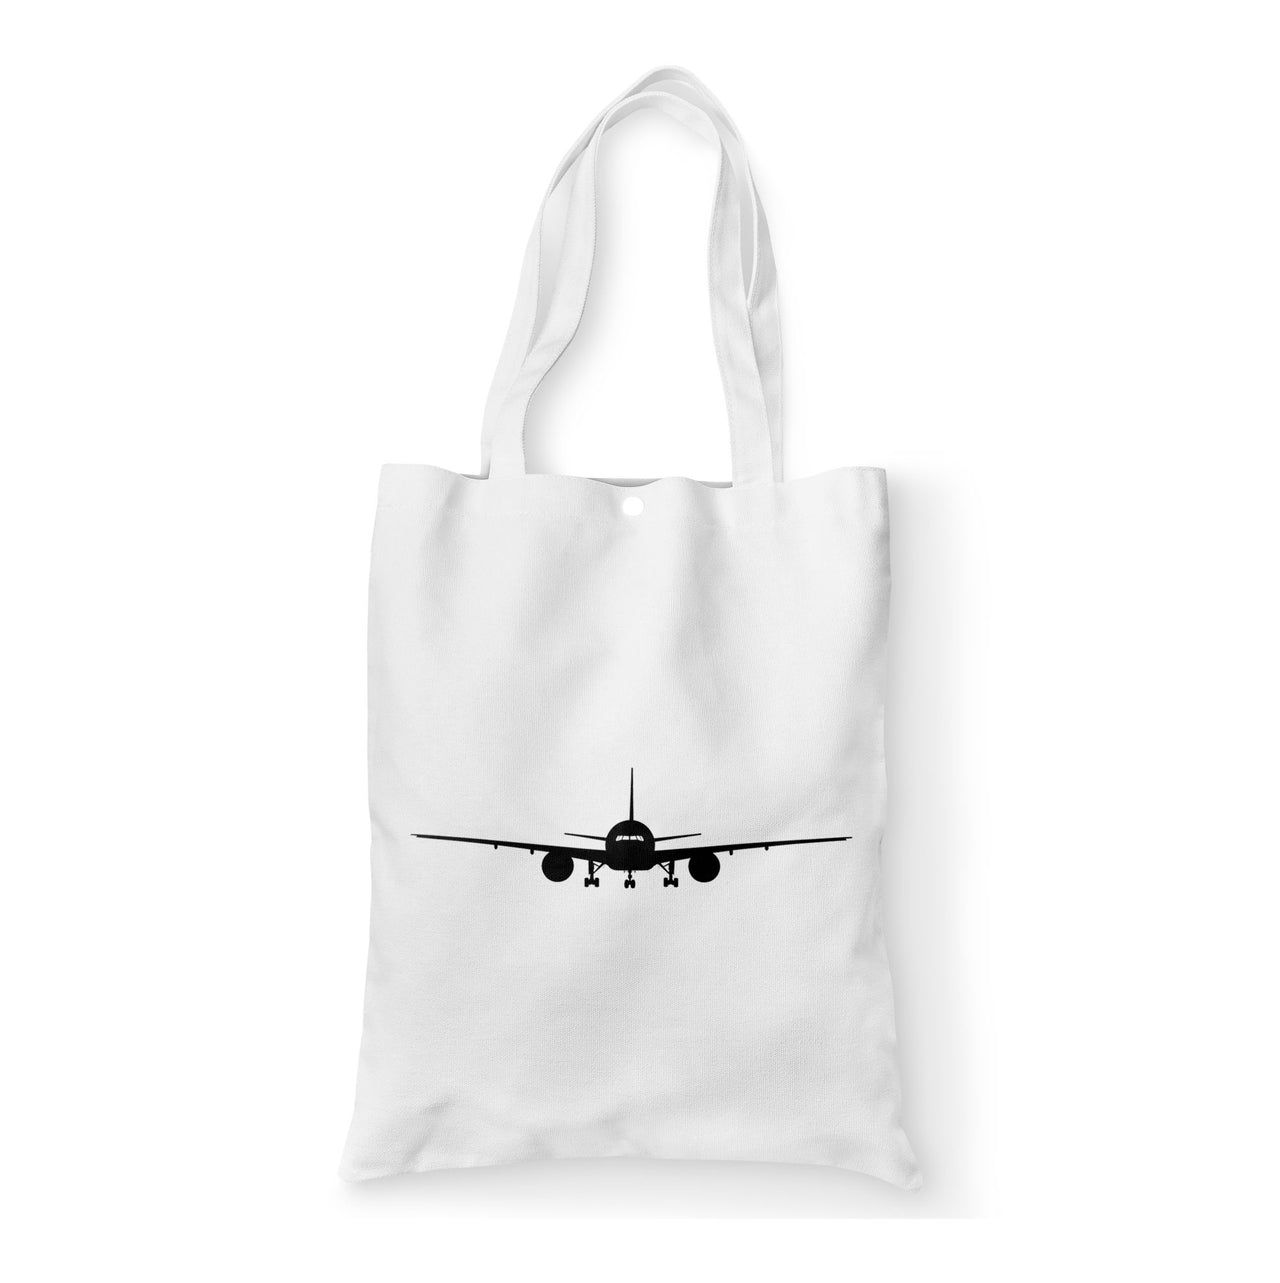 Boeing 777 Silhouette Designed Tote Bags